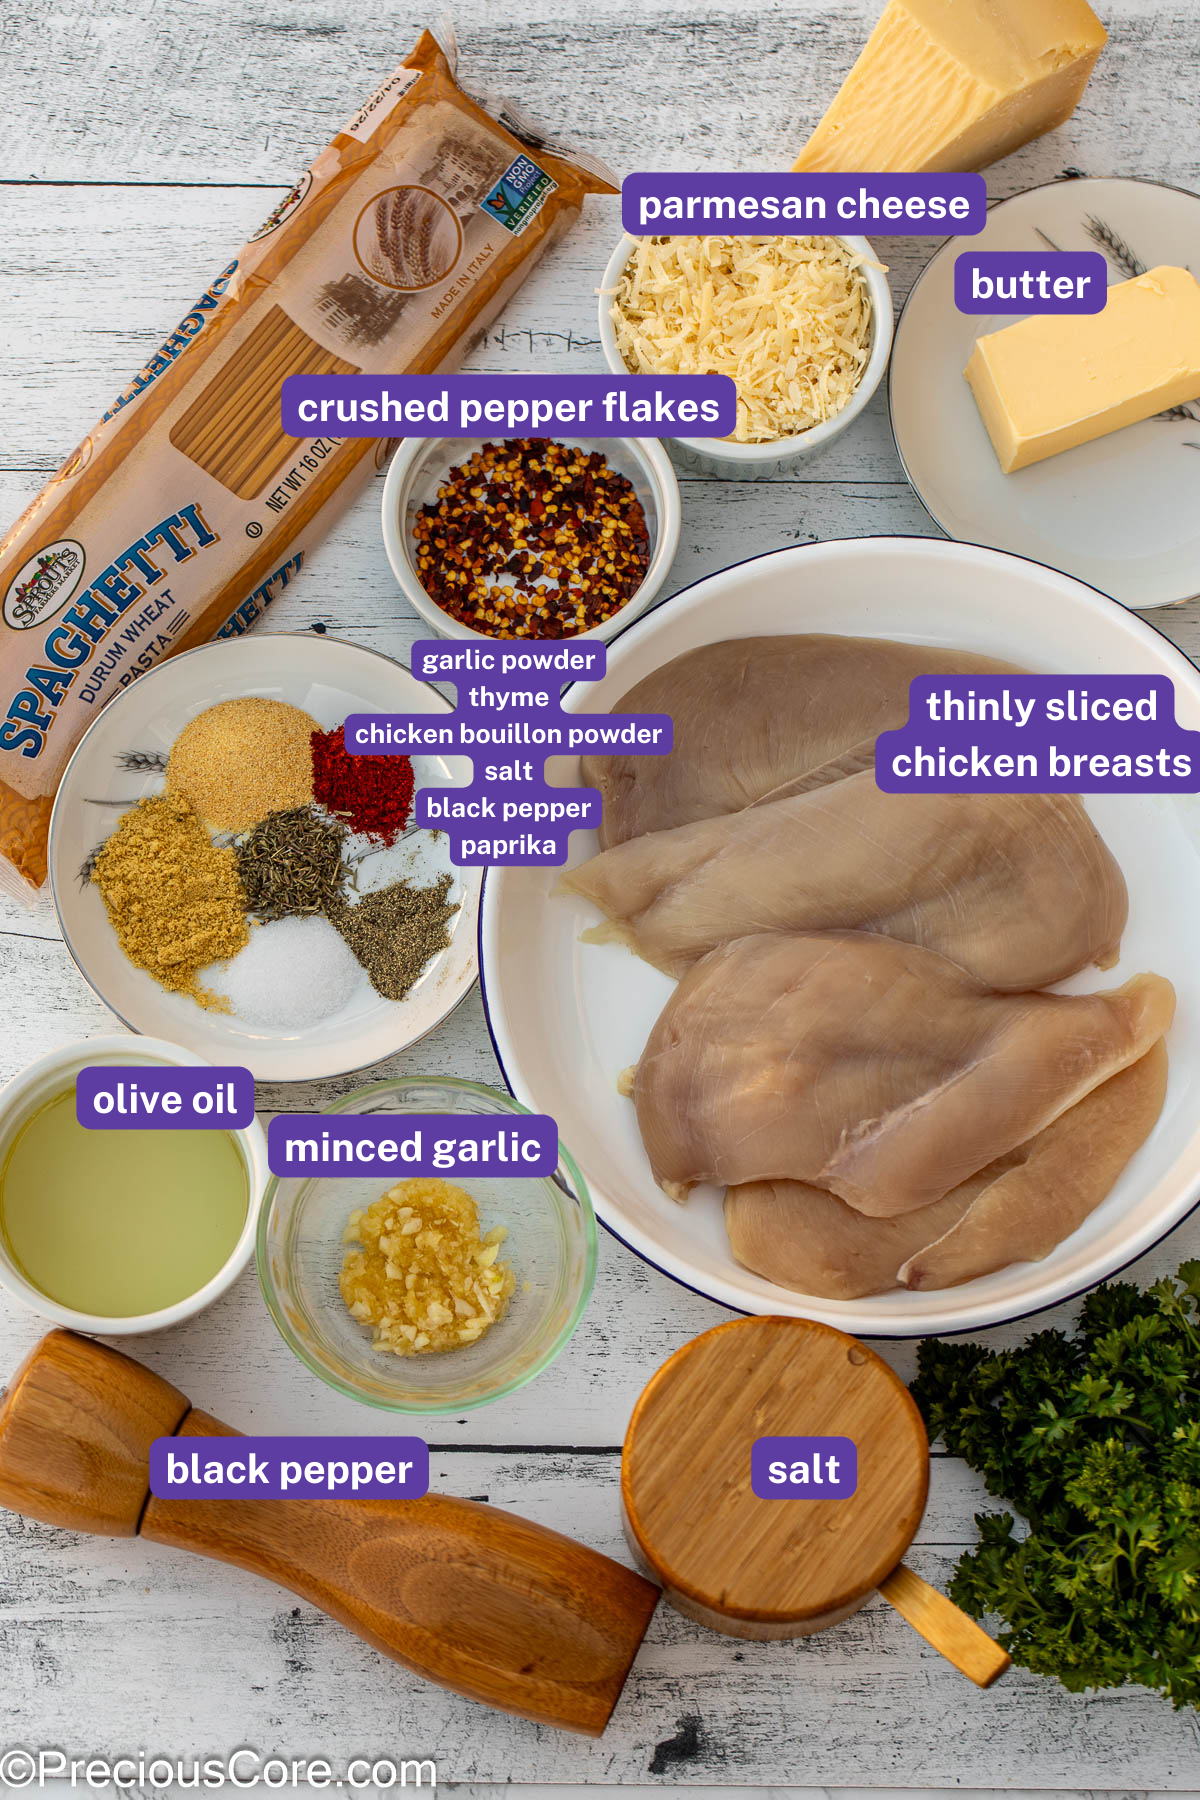 Pasta, chicken, and other ingredients with labels on them.